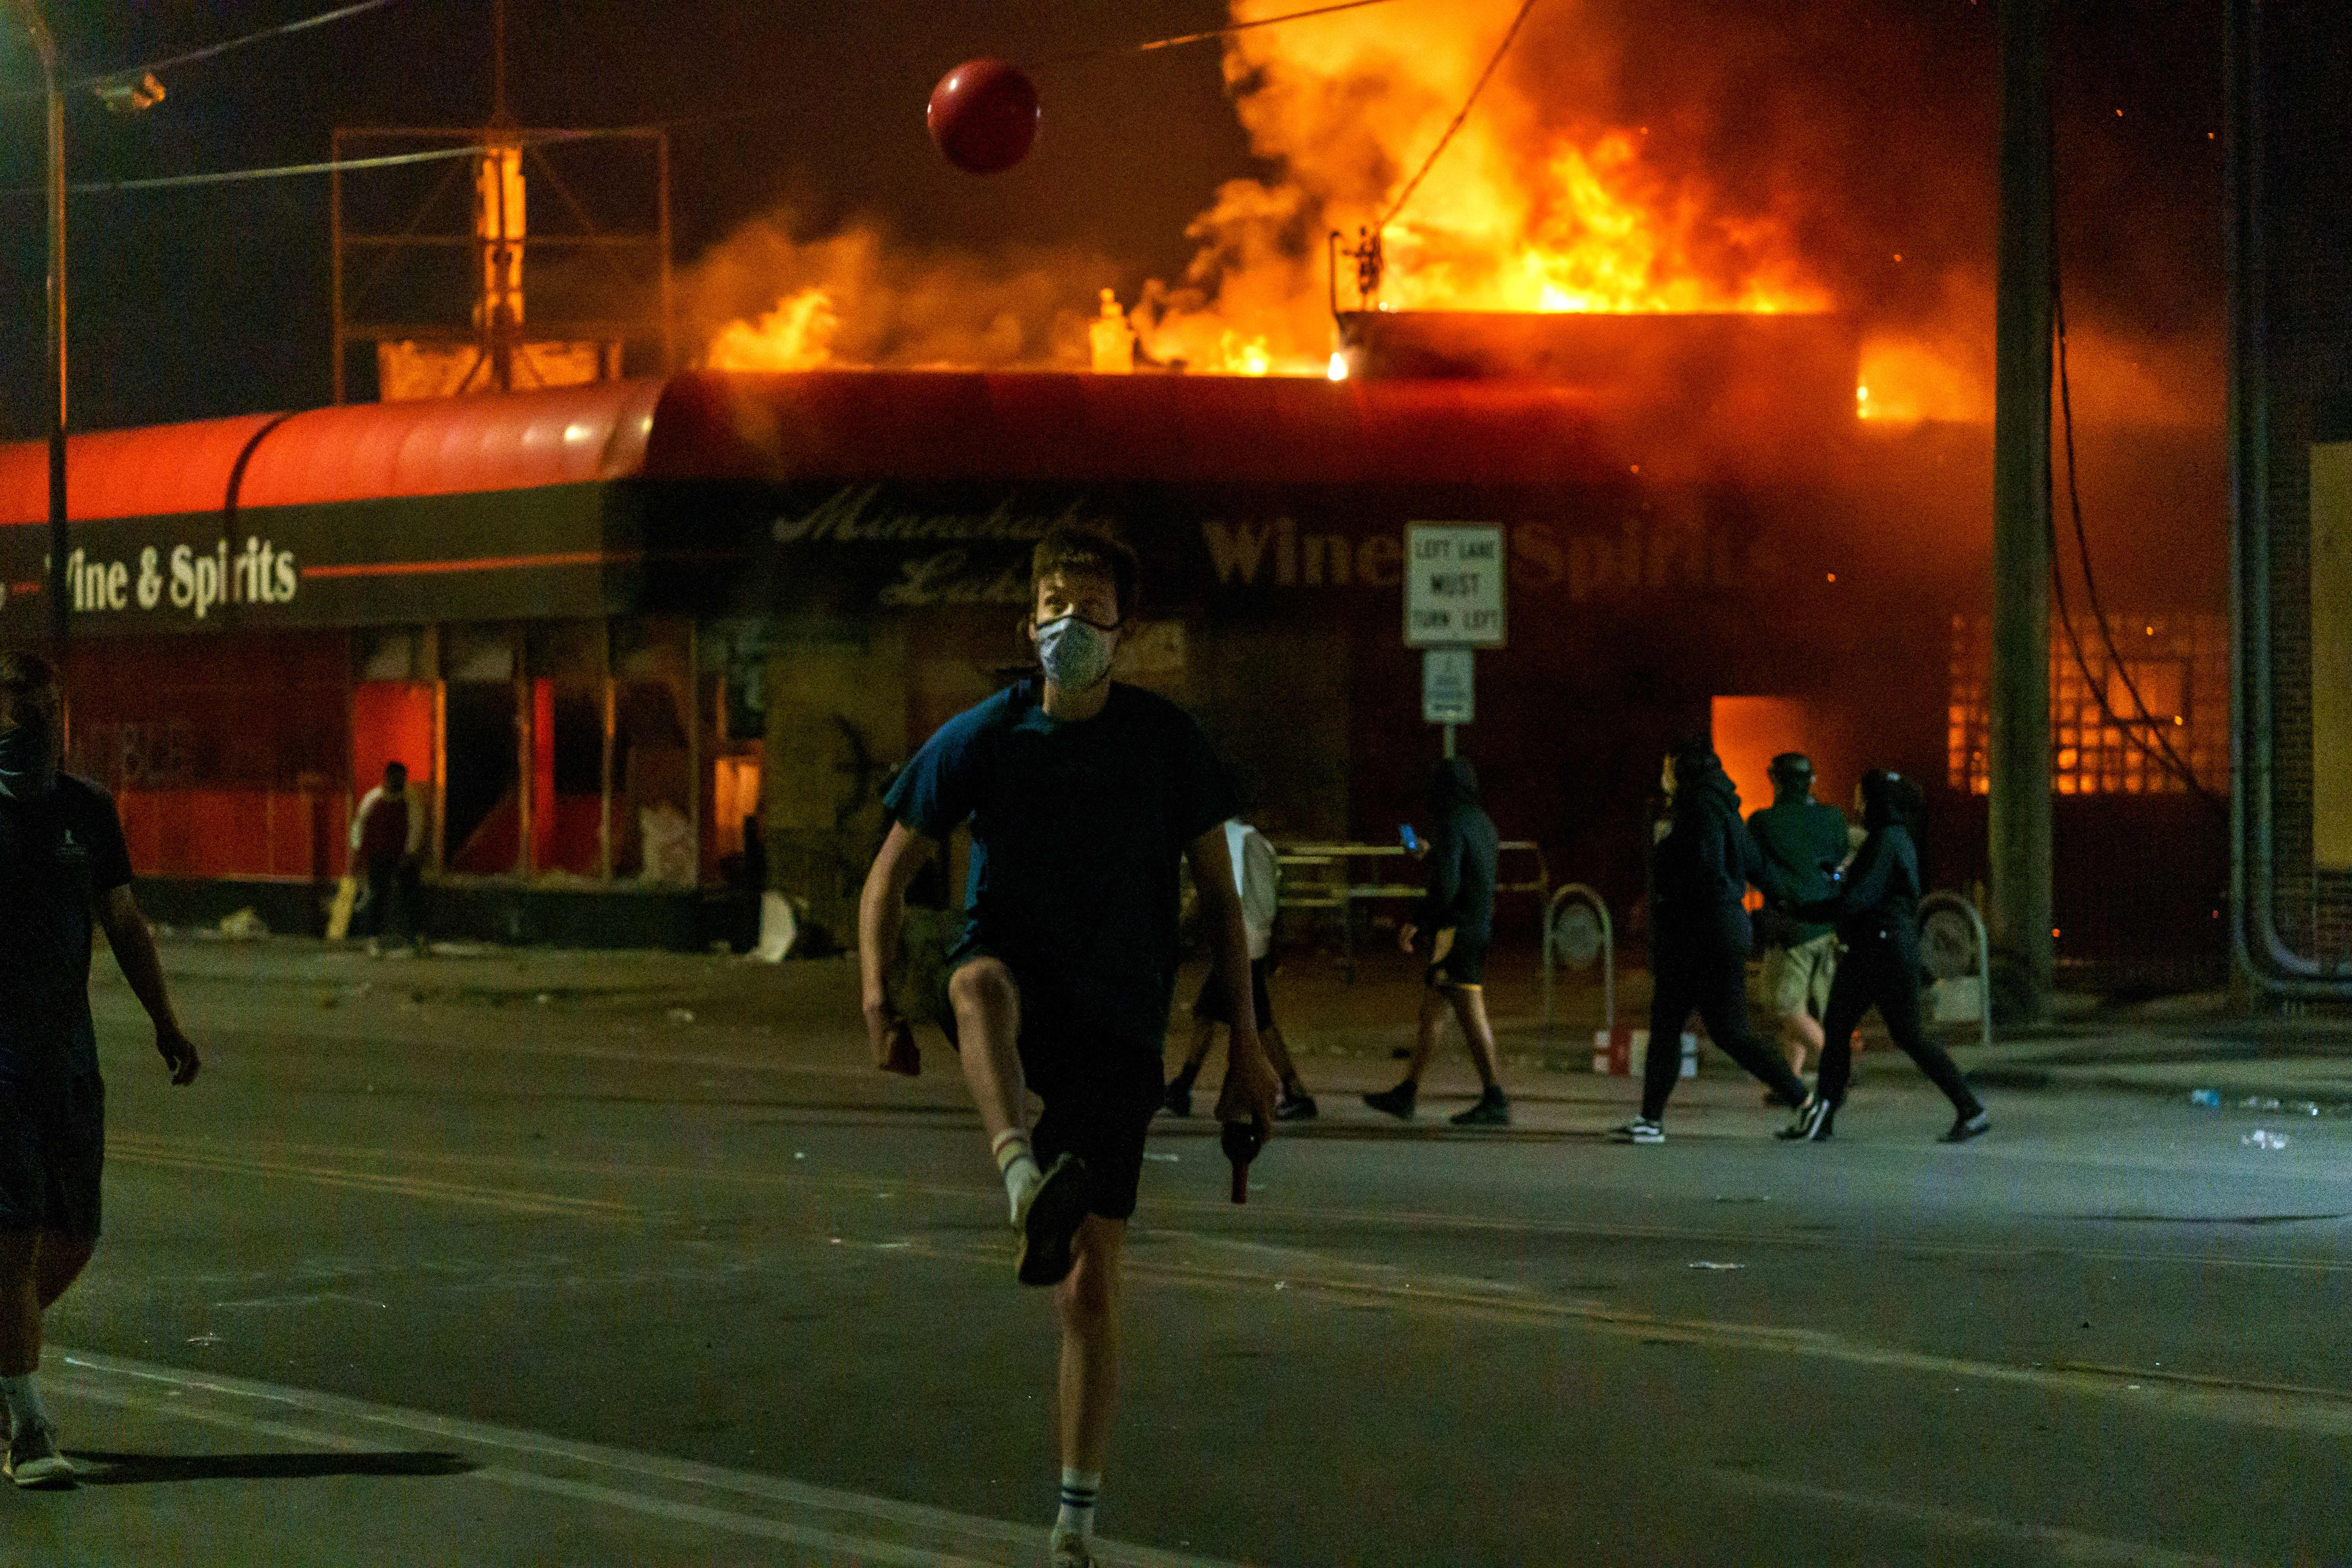 A protester kicks a ball in front of a liquor store in flames on May 28, 2020 in Minneapolis, Minnesota, during a protest over the death of George Floyd, an unarmed black man, who died after a police officer kneeled on his neck for several minutes. (Photo by KEREM YUCEL/AFP via Getty Images)